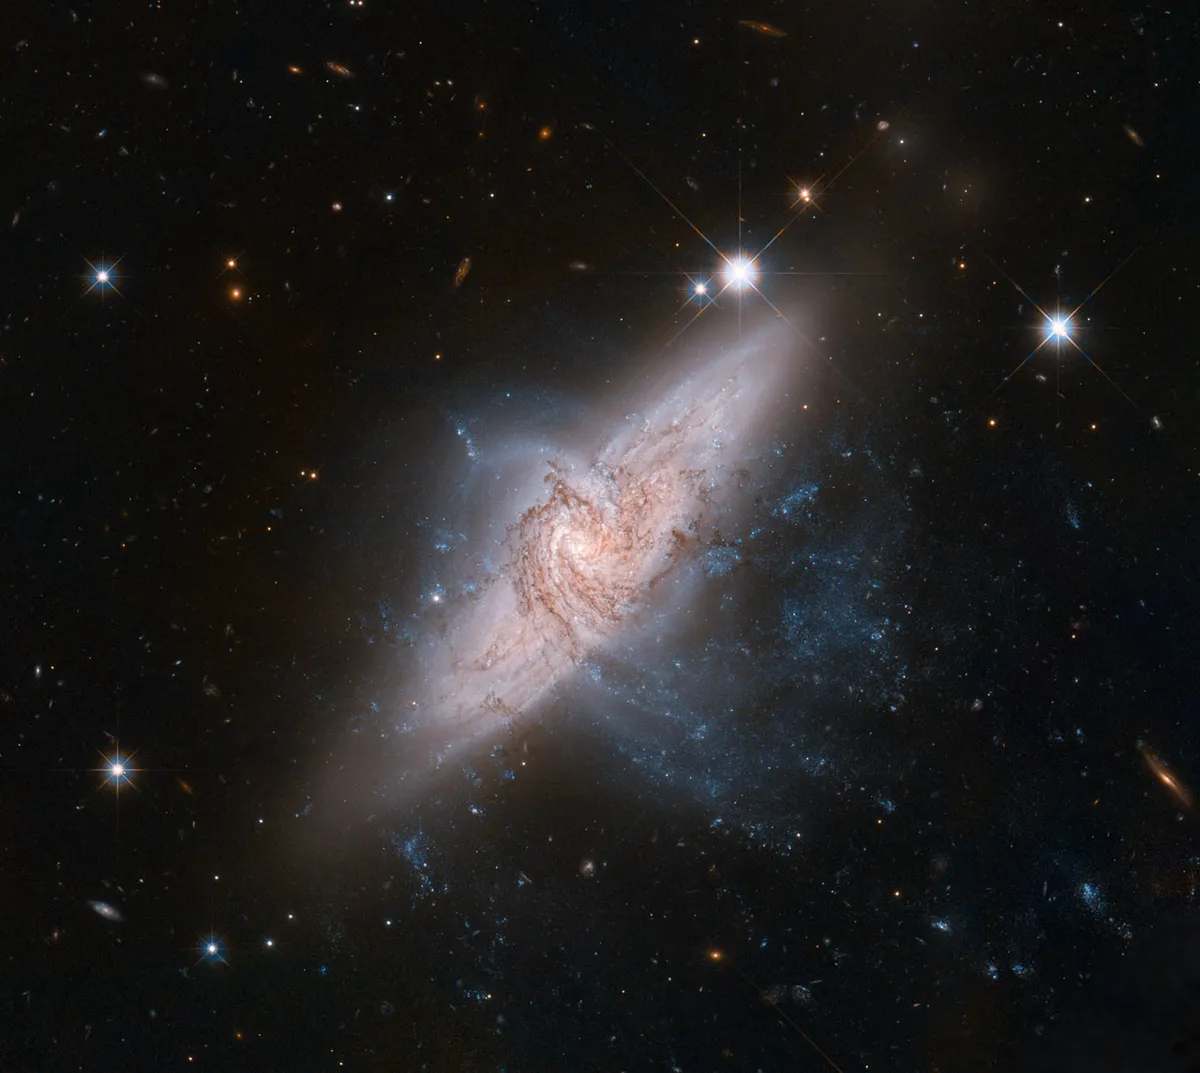 NGC 3314 14 June 2012. A pair of ‘overlapping’ galaxies called NGC 3314. While they appear to be colliding, they are only in alignment from our vantage point. Credit: NASA, ESA, the Hubble Heritage (STScI/AURA)-ESA/Hubble Collaboration, and W. Keel (University of Alabama)